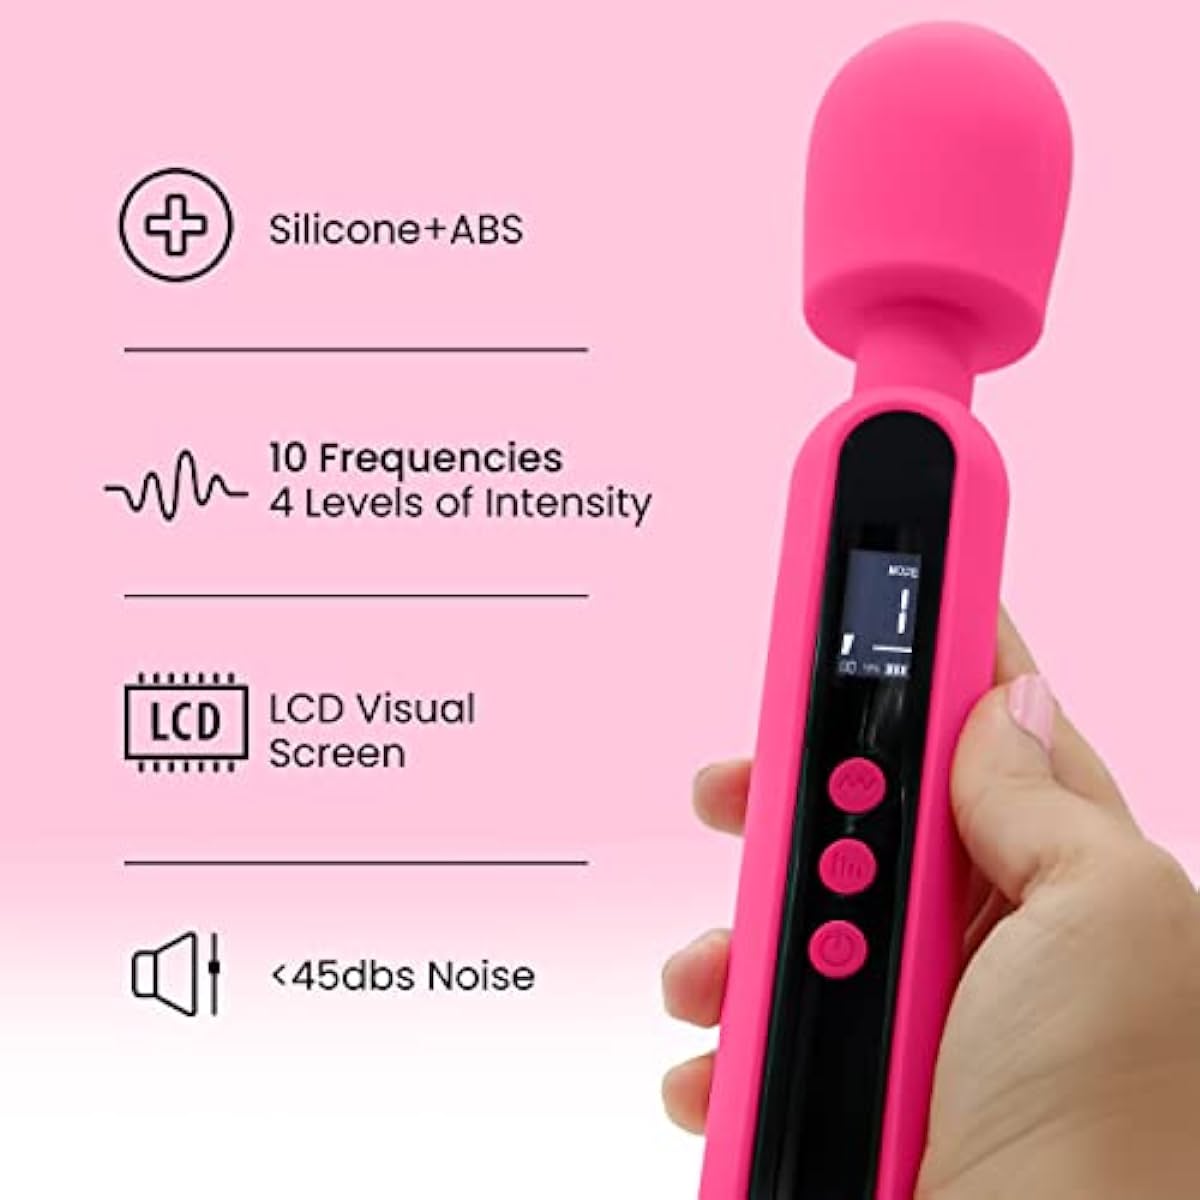 Personal Massager Wand – Digital Display – 10 Frequencies + 4 Intensity Levels - Wireless - Rechargeable - Travel Massager - Full Body Muscle Tension Relief - Water Resistant